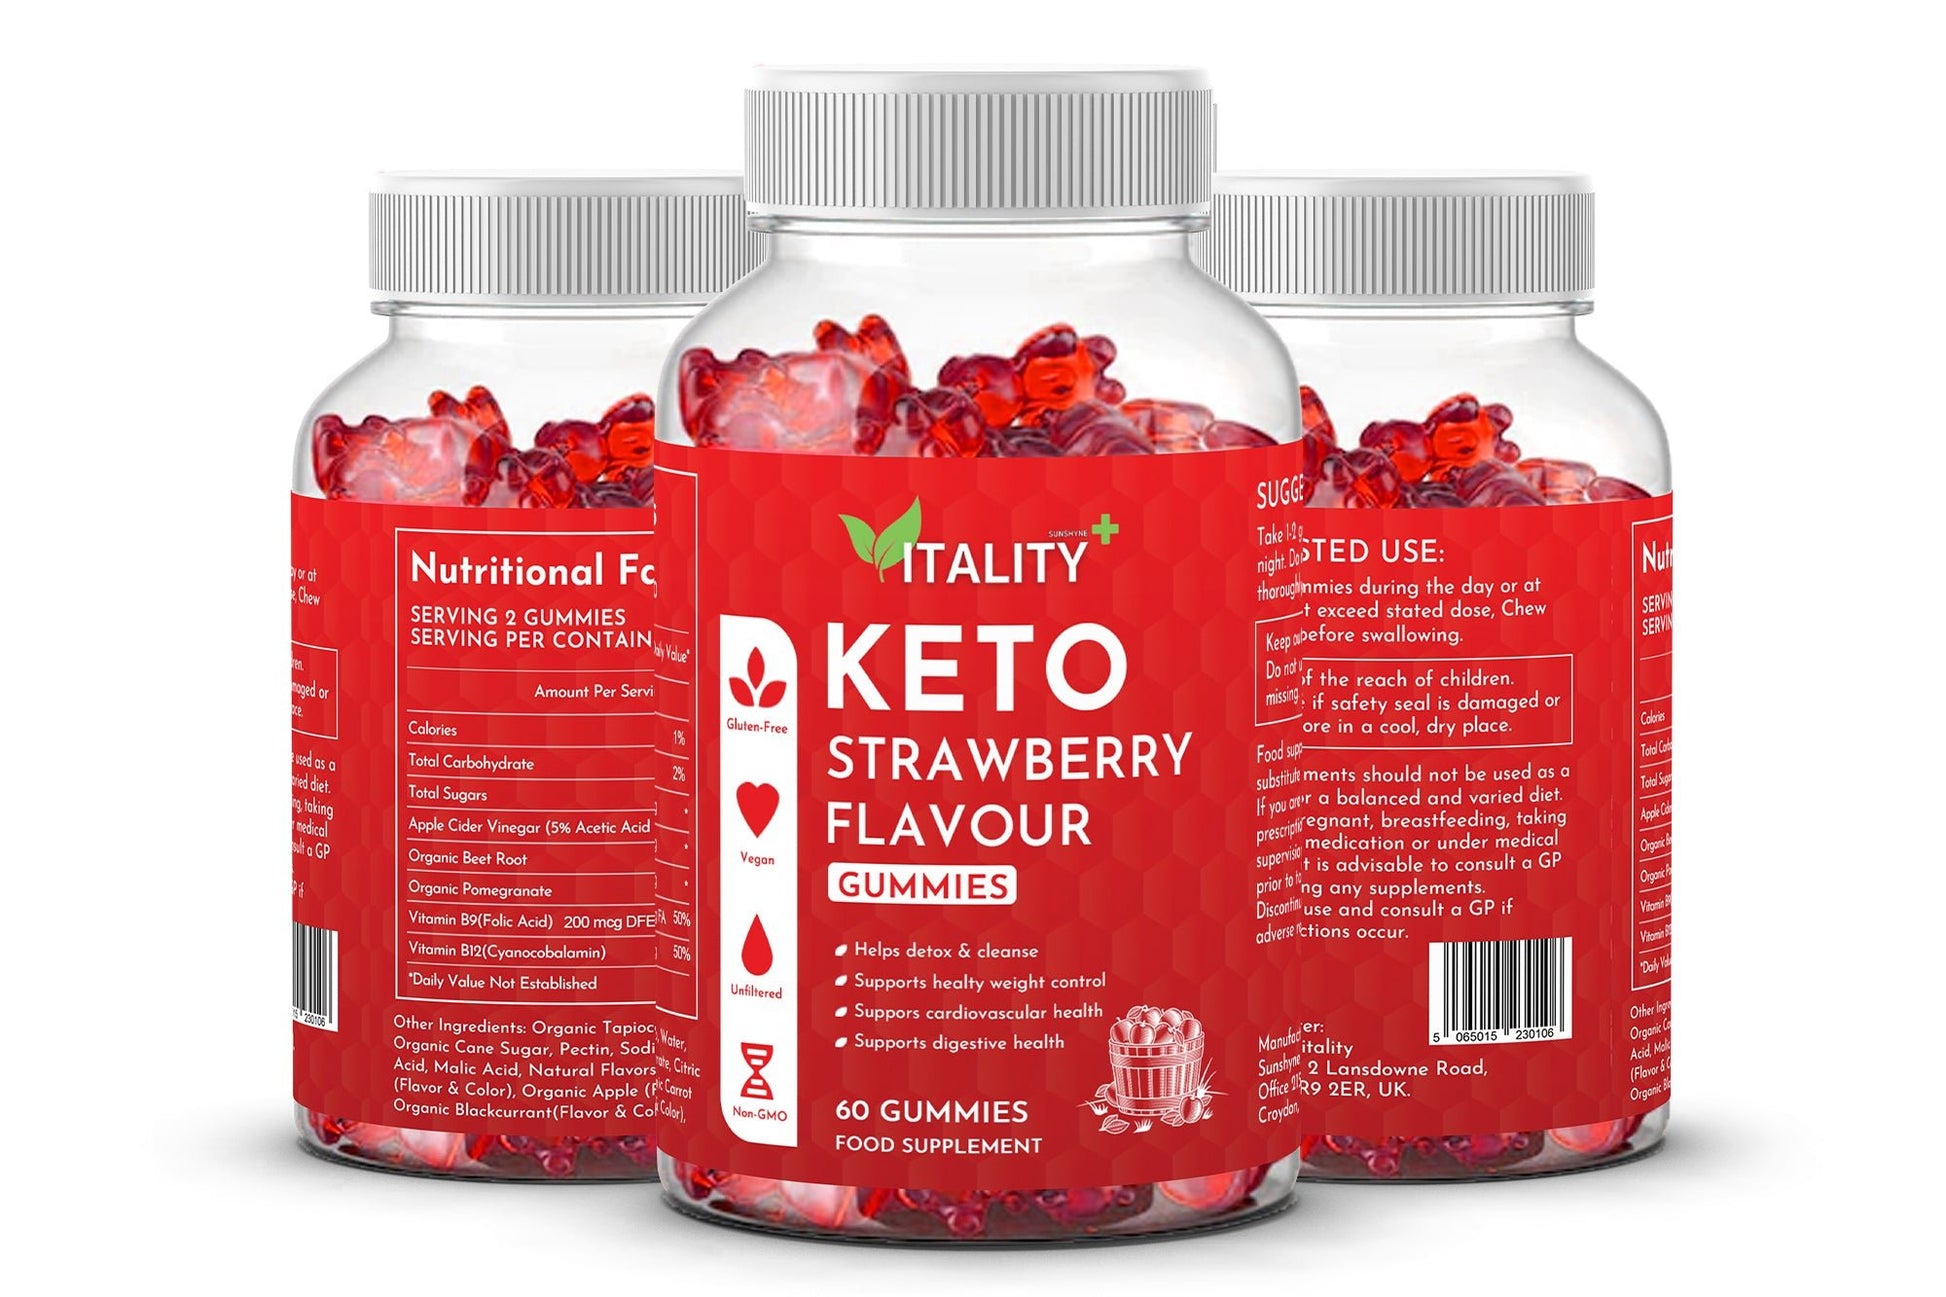 Keto Gummies | Weight Loss Support Food Supplement | 120 Gummies | 2 Month's Supply - Vitality Supplements